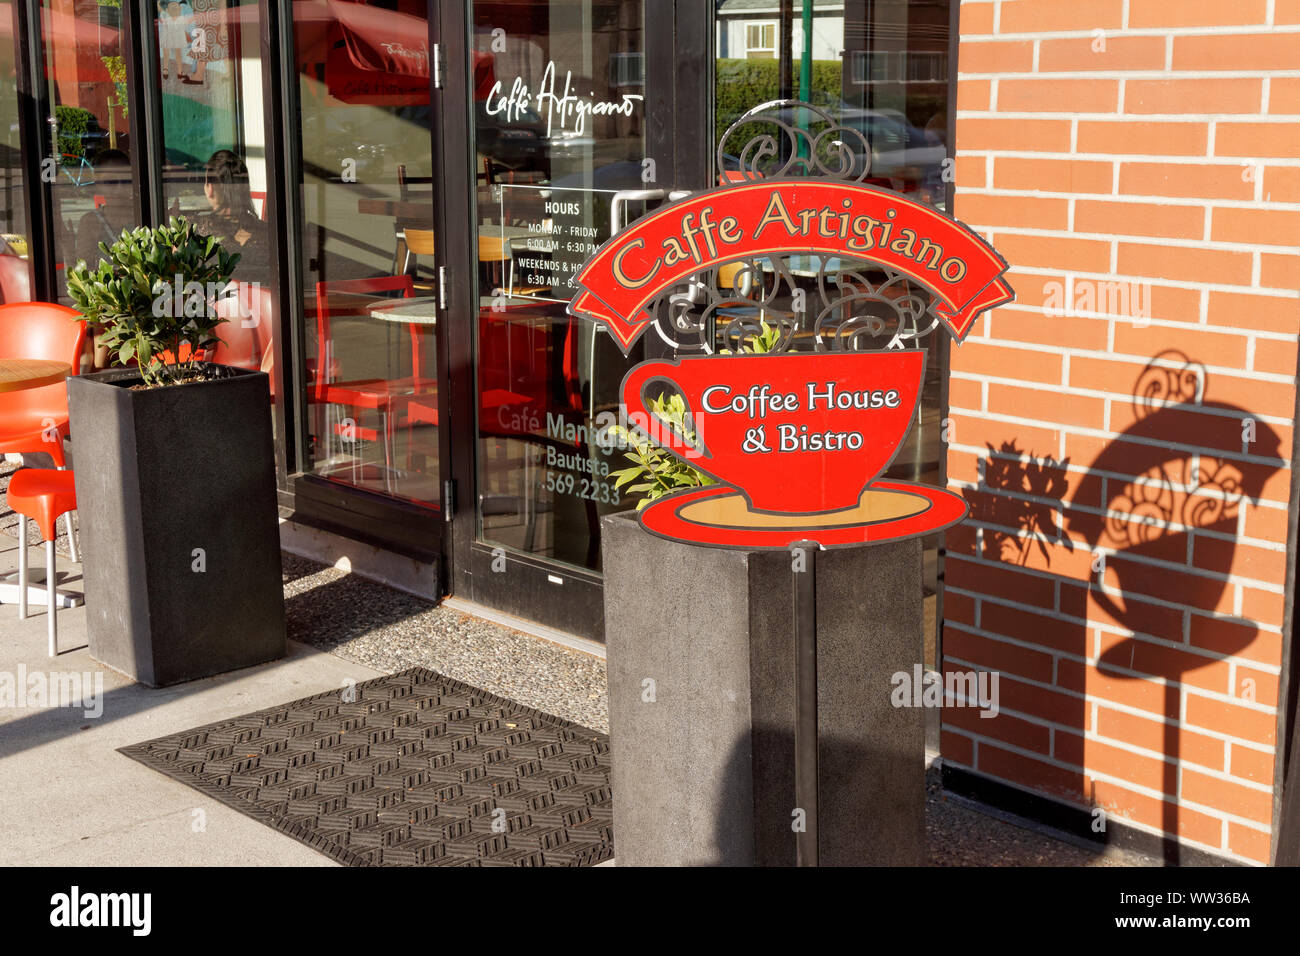 Caffe Artigiano coffee house on Main Street, Vancouver, BC, Canada Banque D'Images